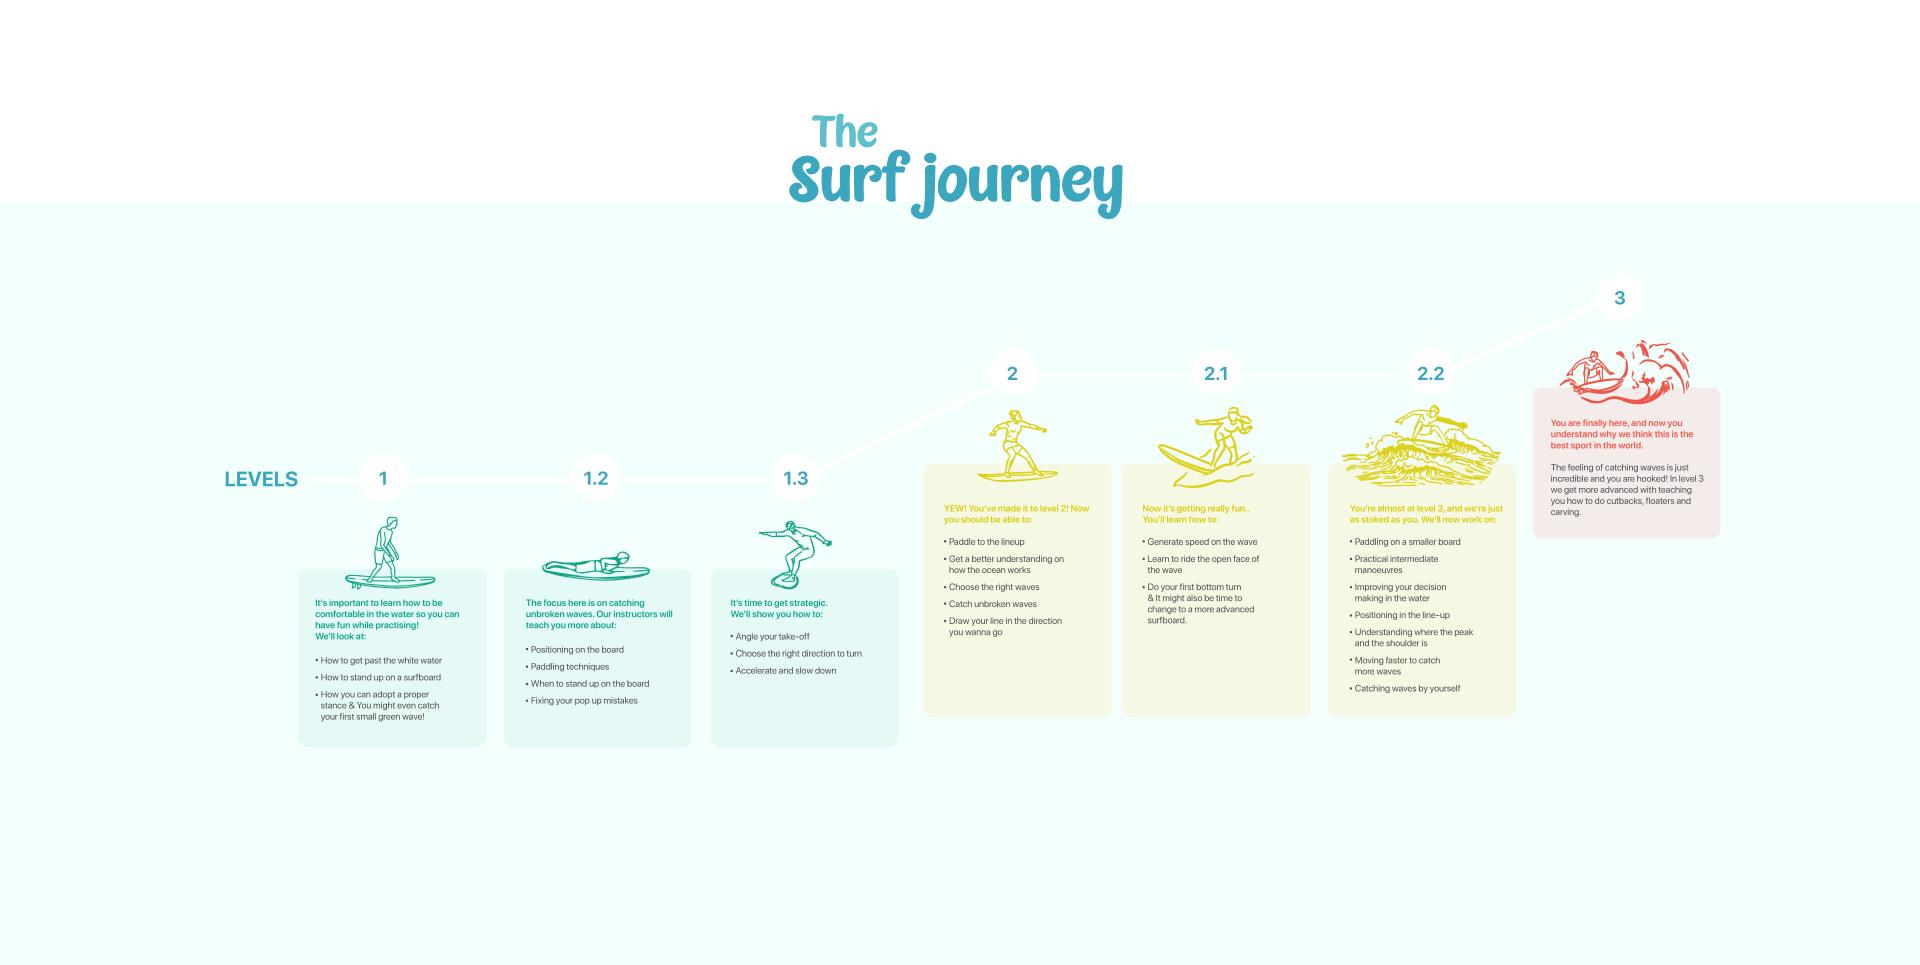 The surf journey